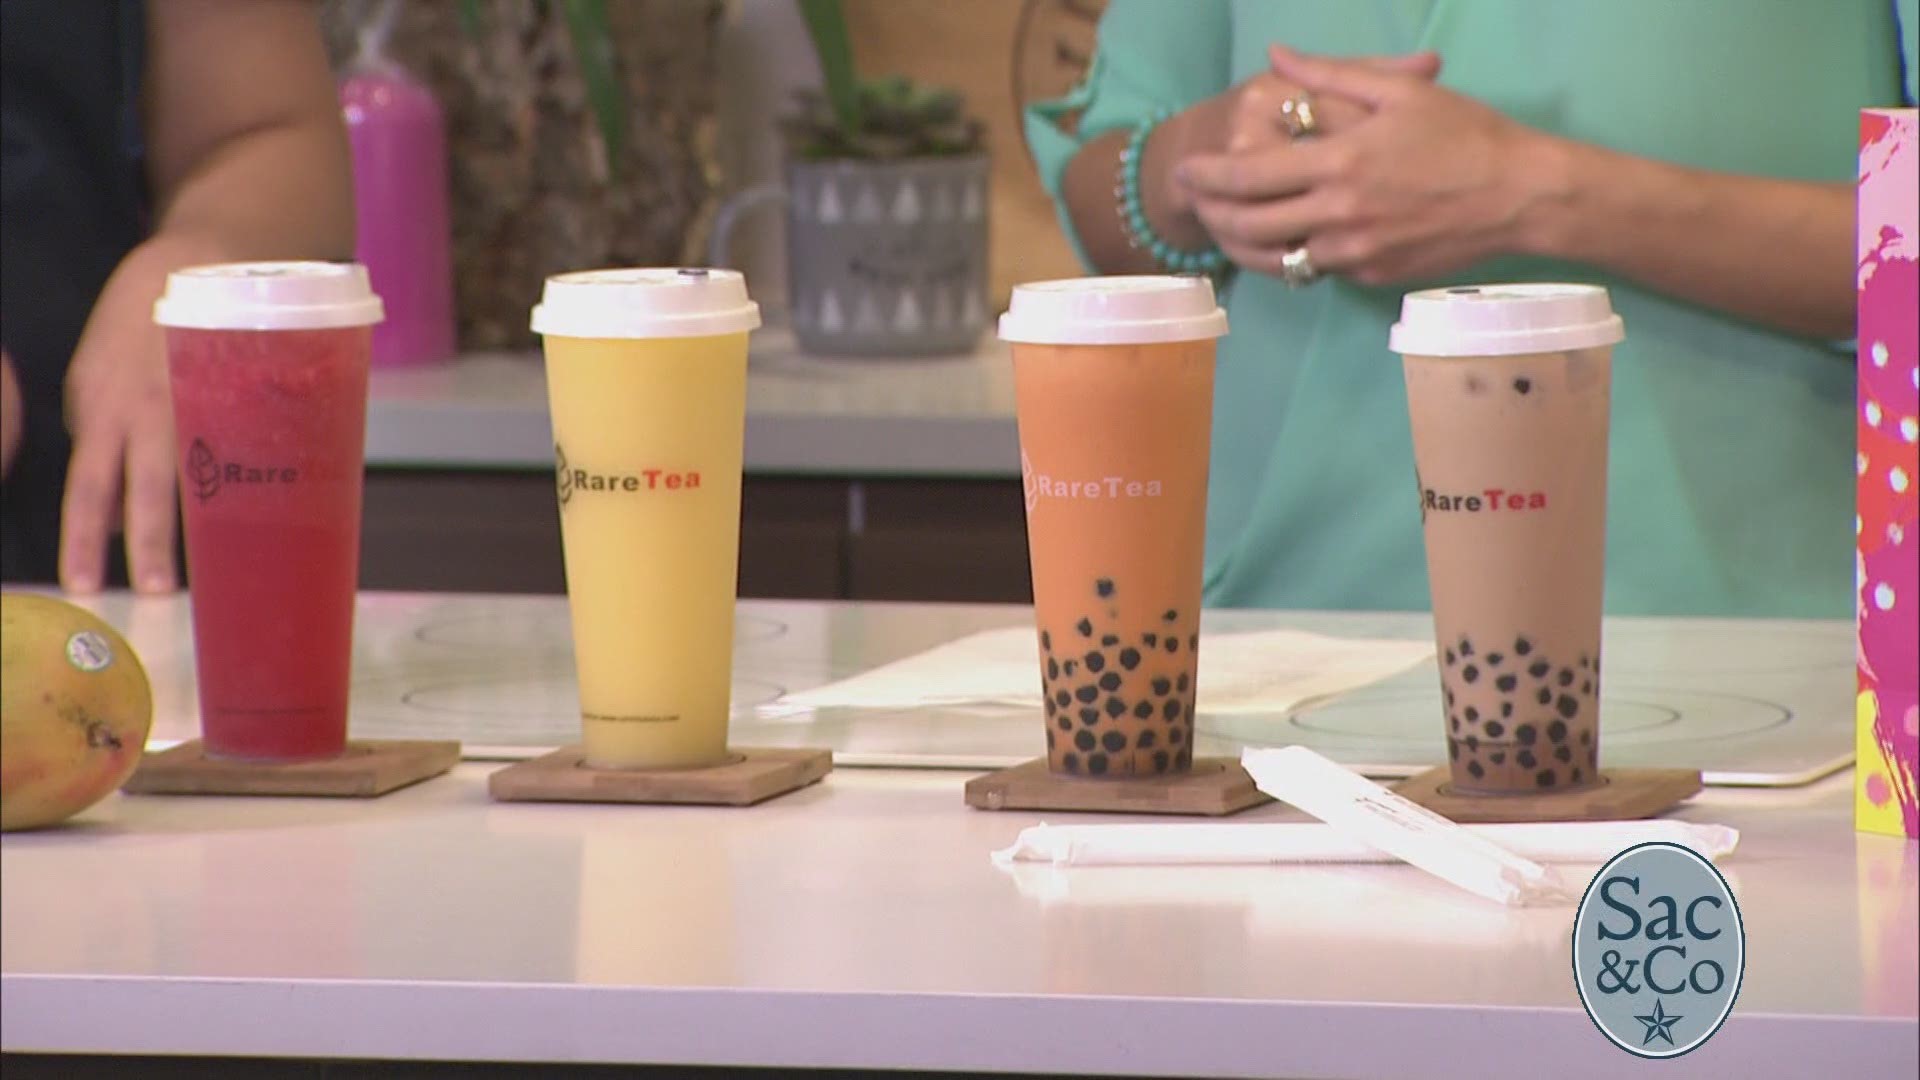 It’s National Bubble Tea Day and we’re trying some yummy teas from Sacramento’s “RareTea”!